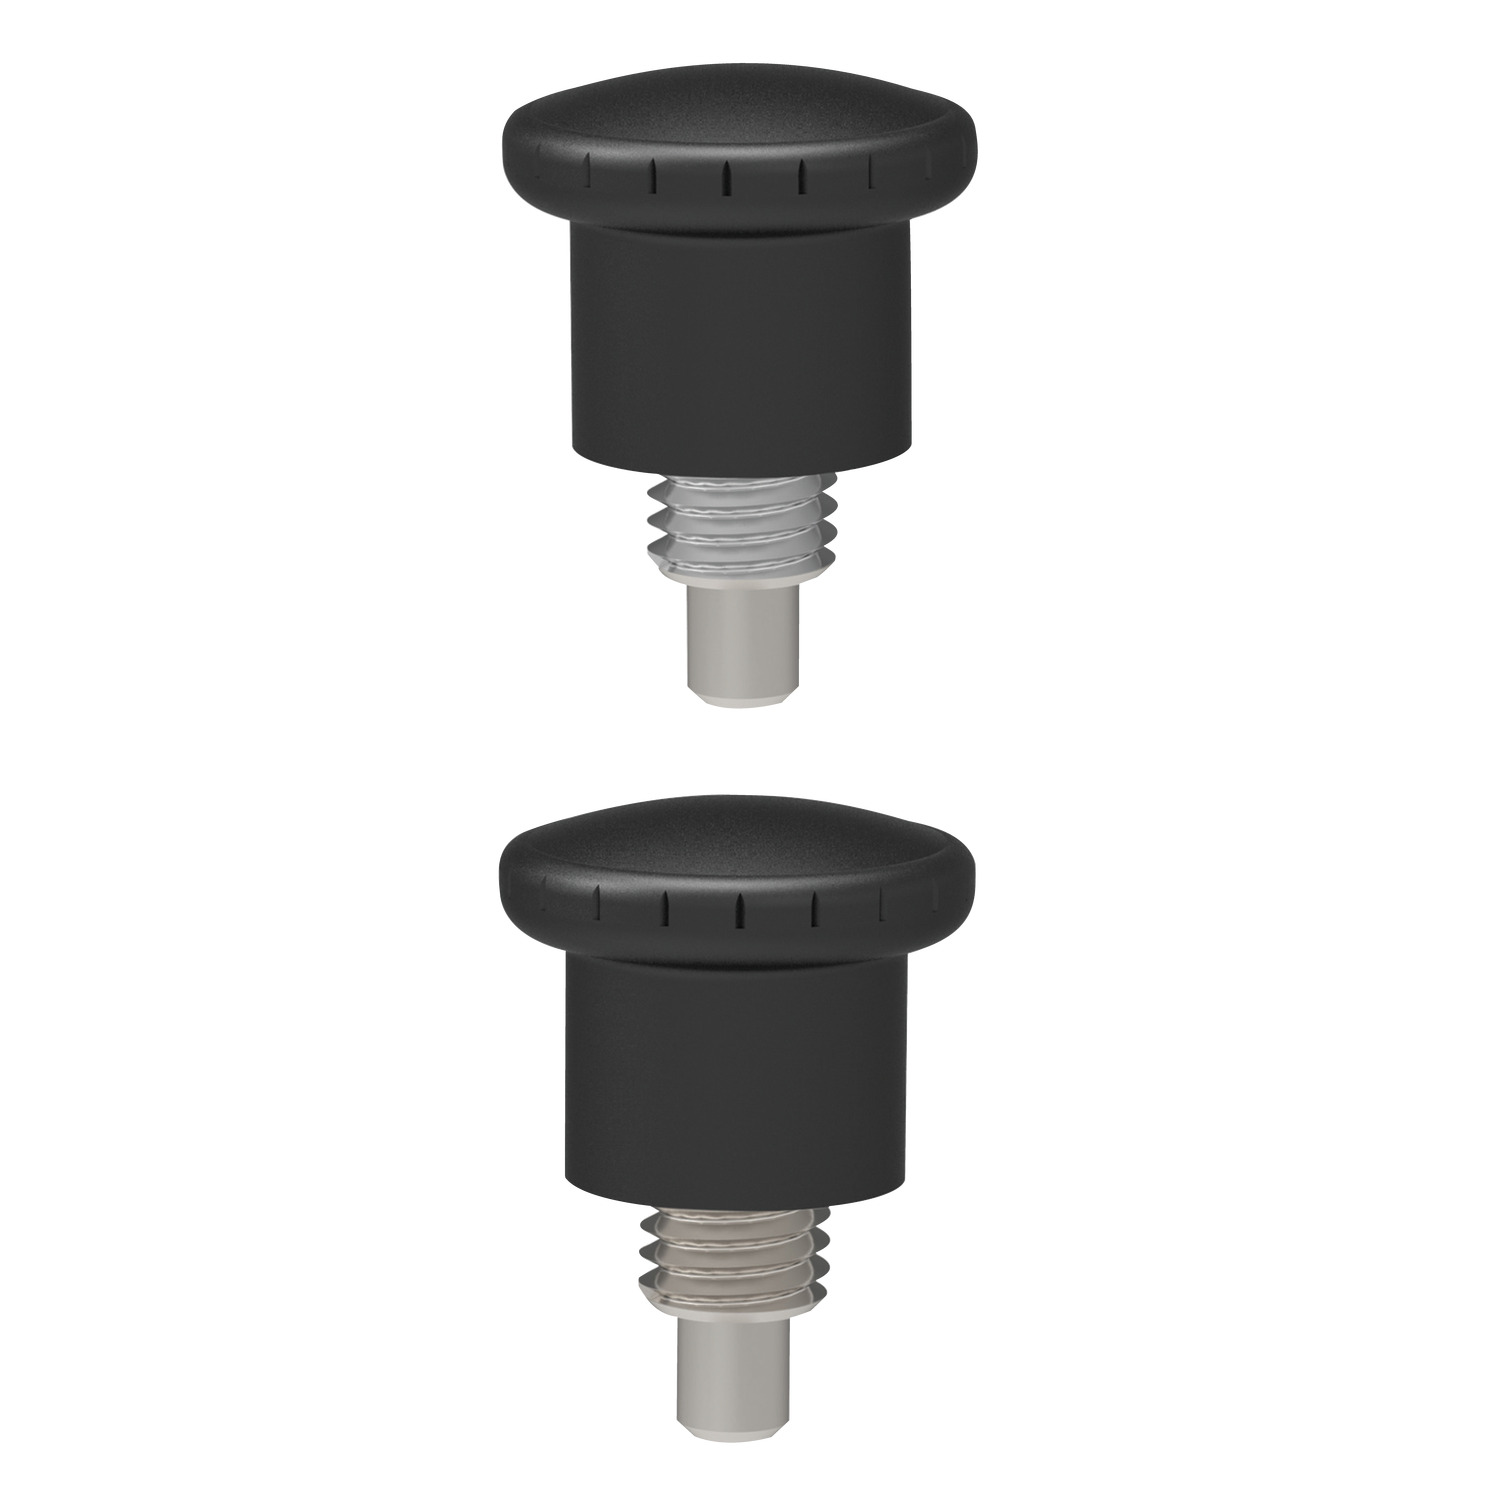 Index Plungers - Pull Grip An extra fine threaded mini index plunger, for installating on the thinest of sheet metal.